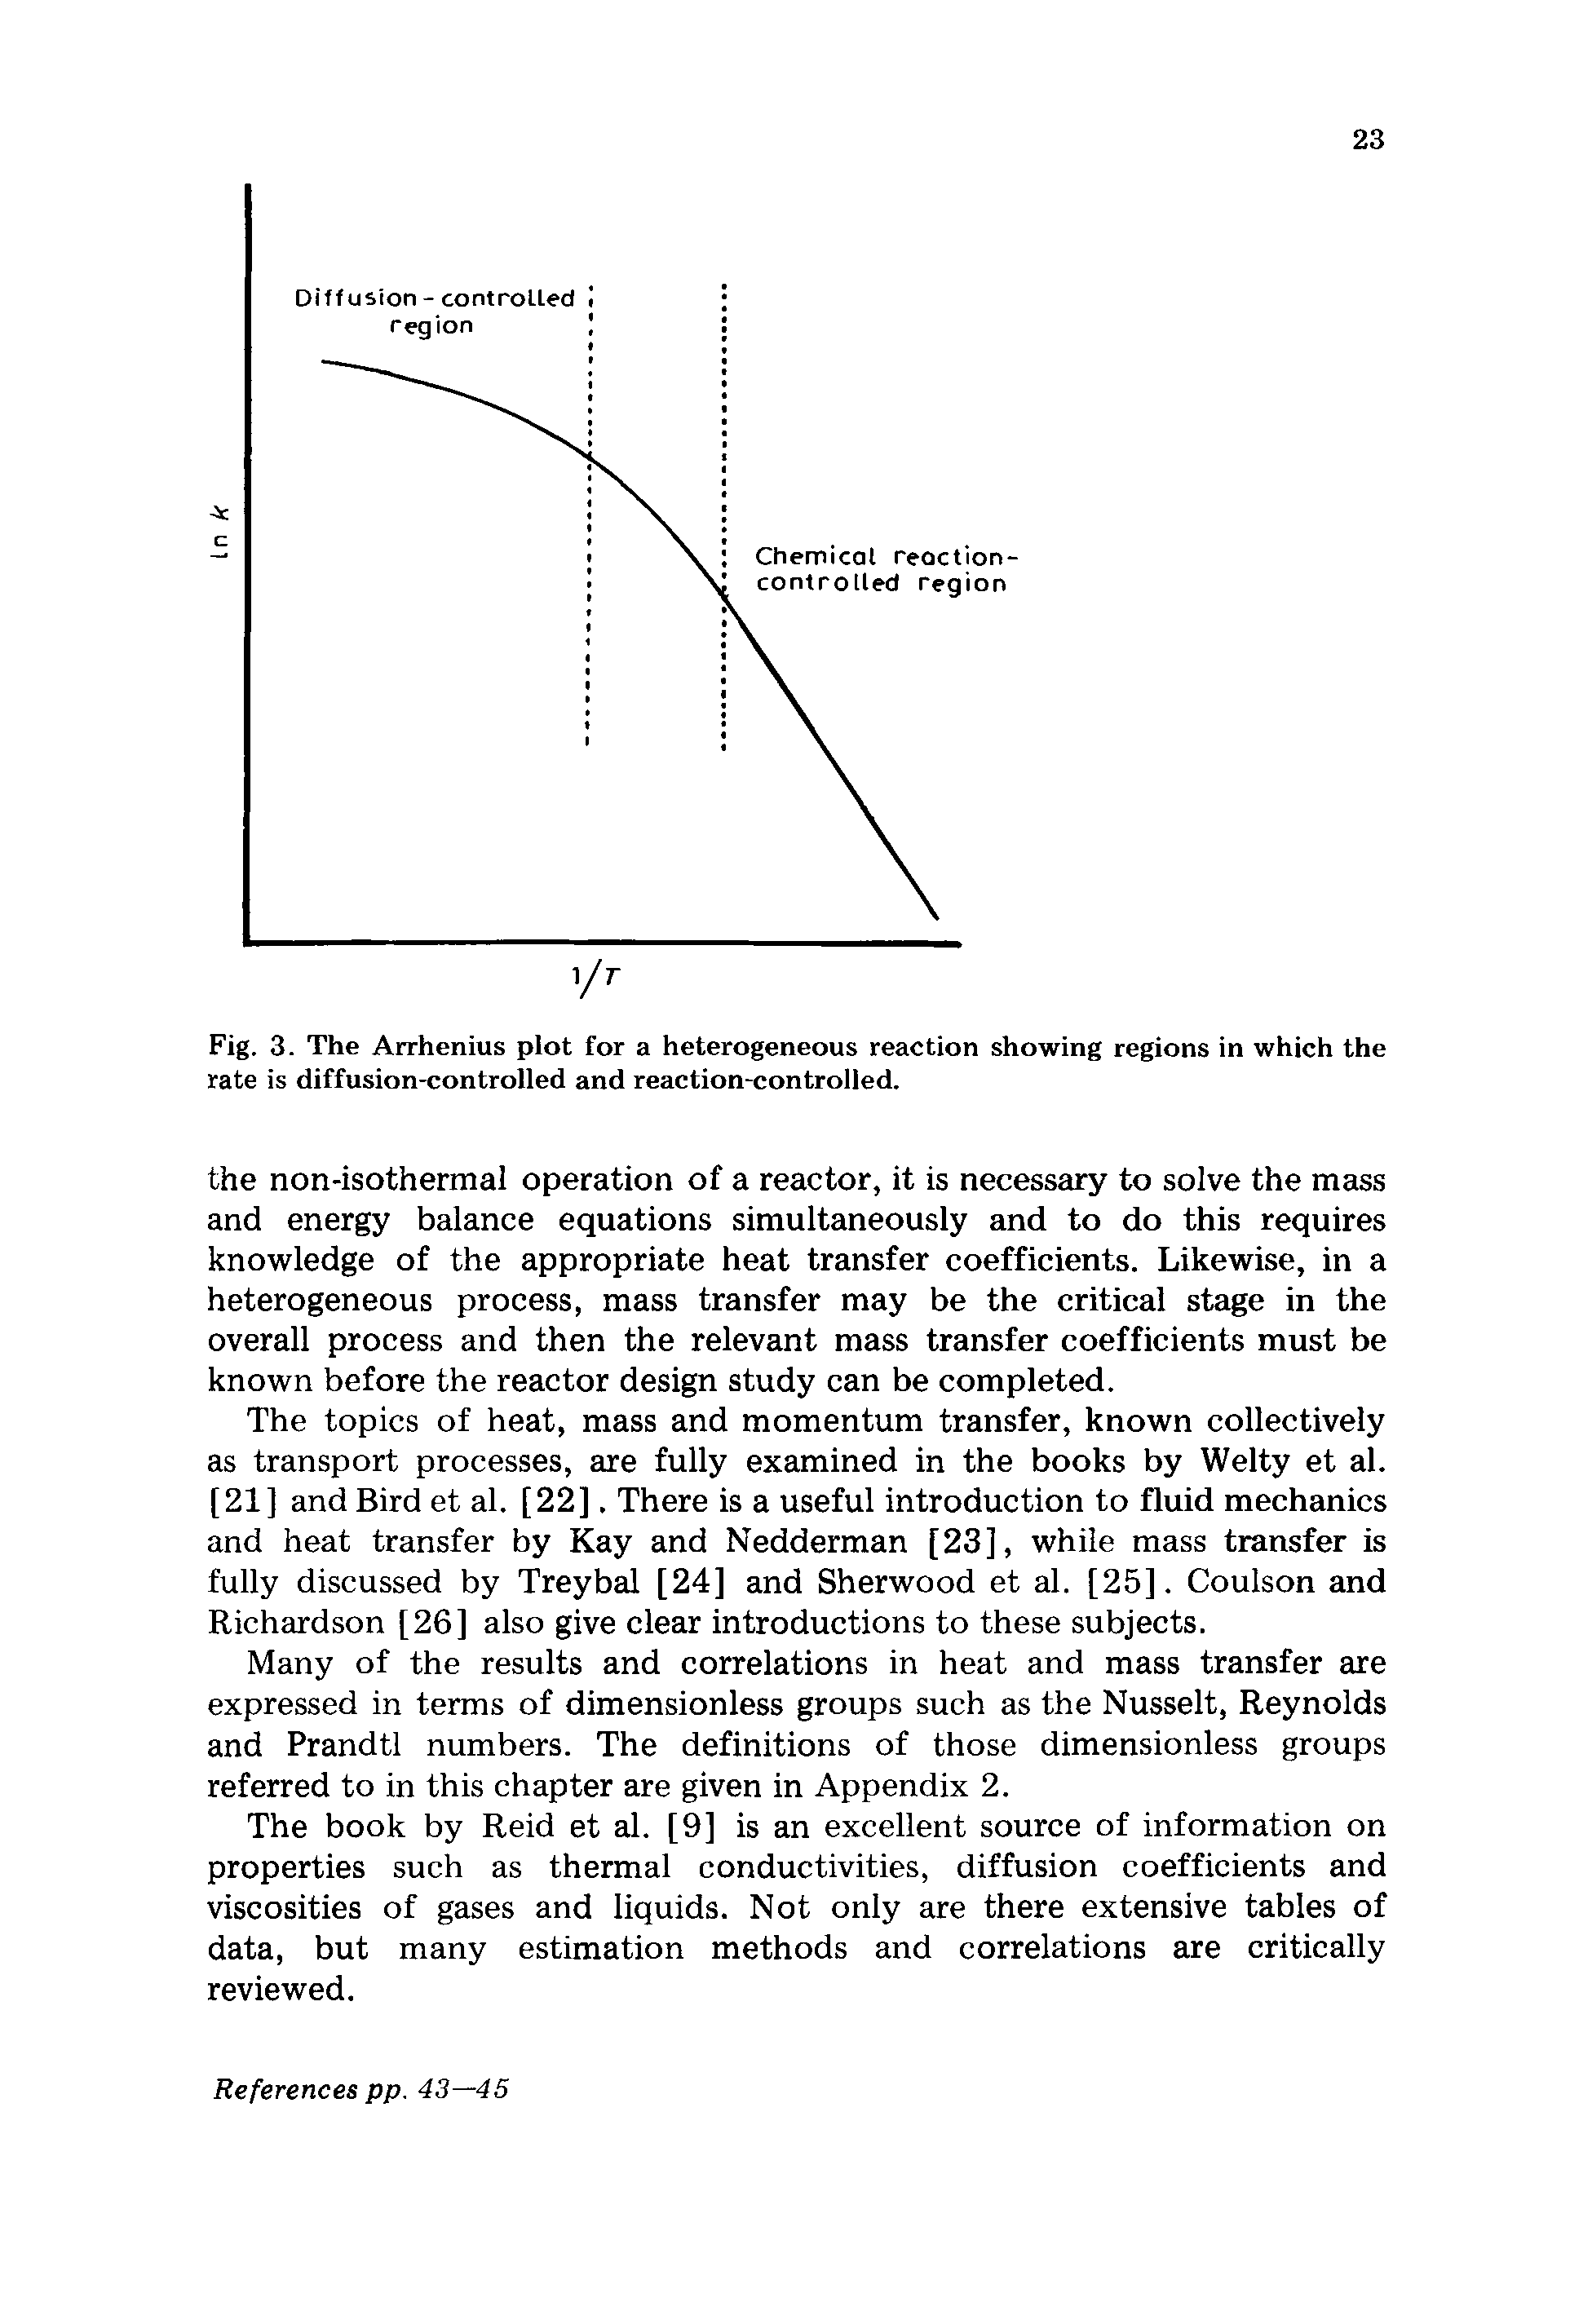 Fig. 3. The Arrhenius plot for a heterogeneous reaction showing regions in which the rate is diffusion-controlled and reaction-controlled.